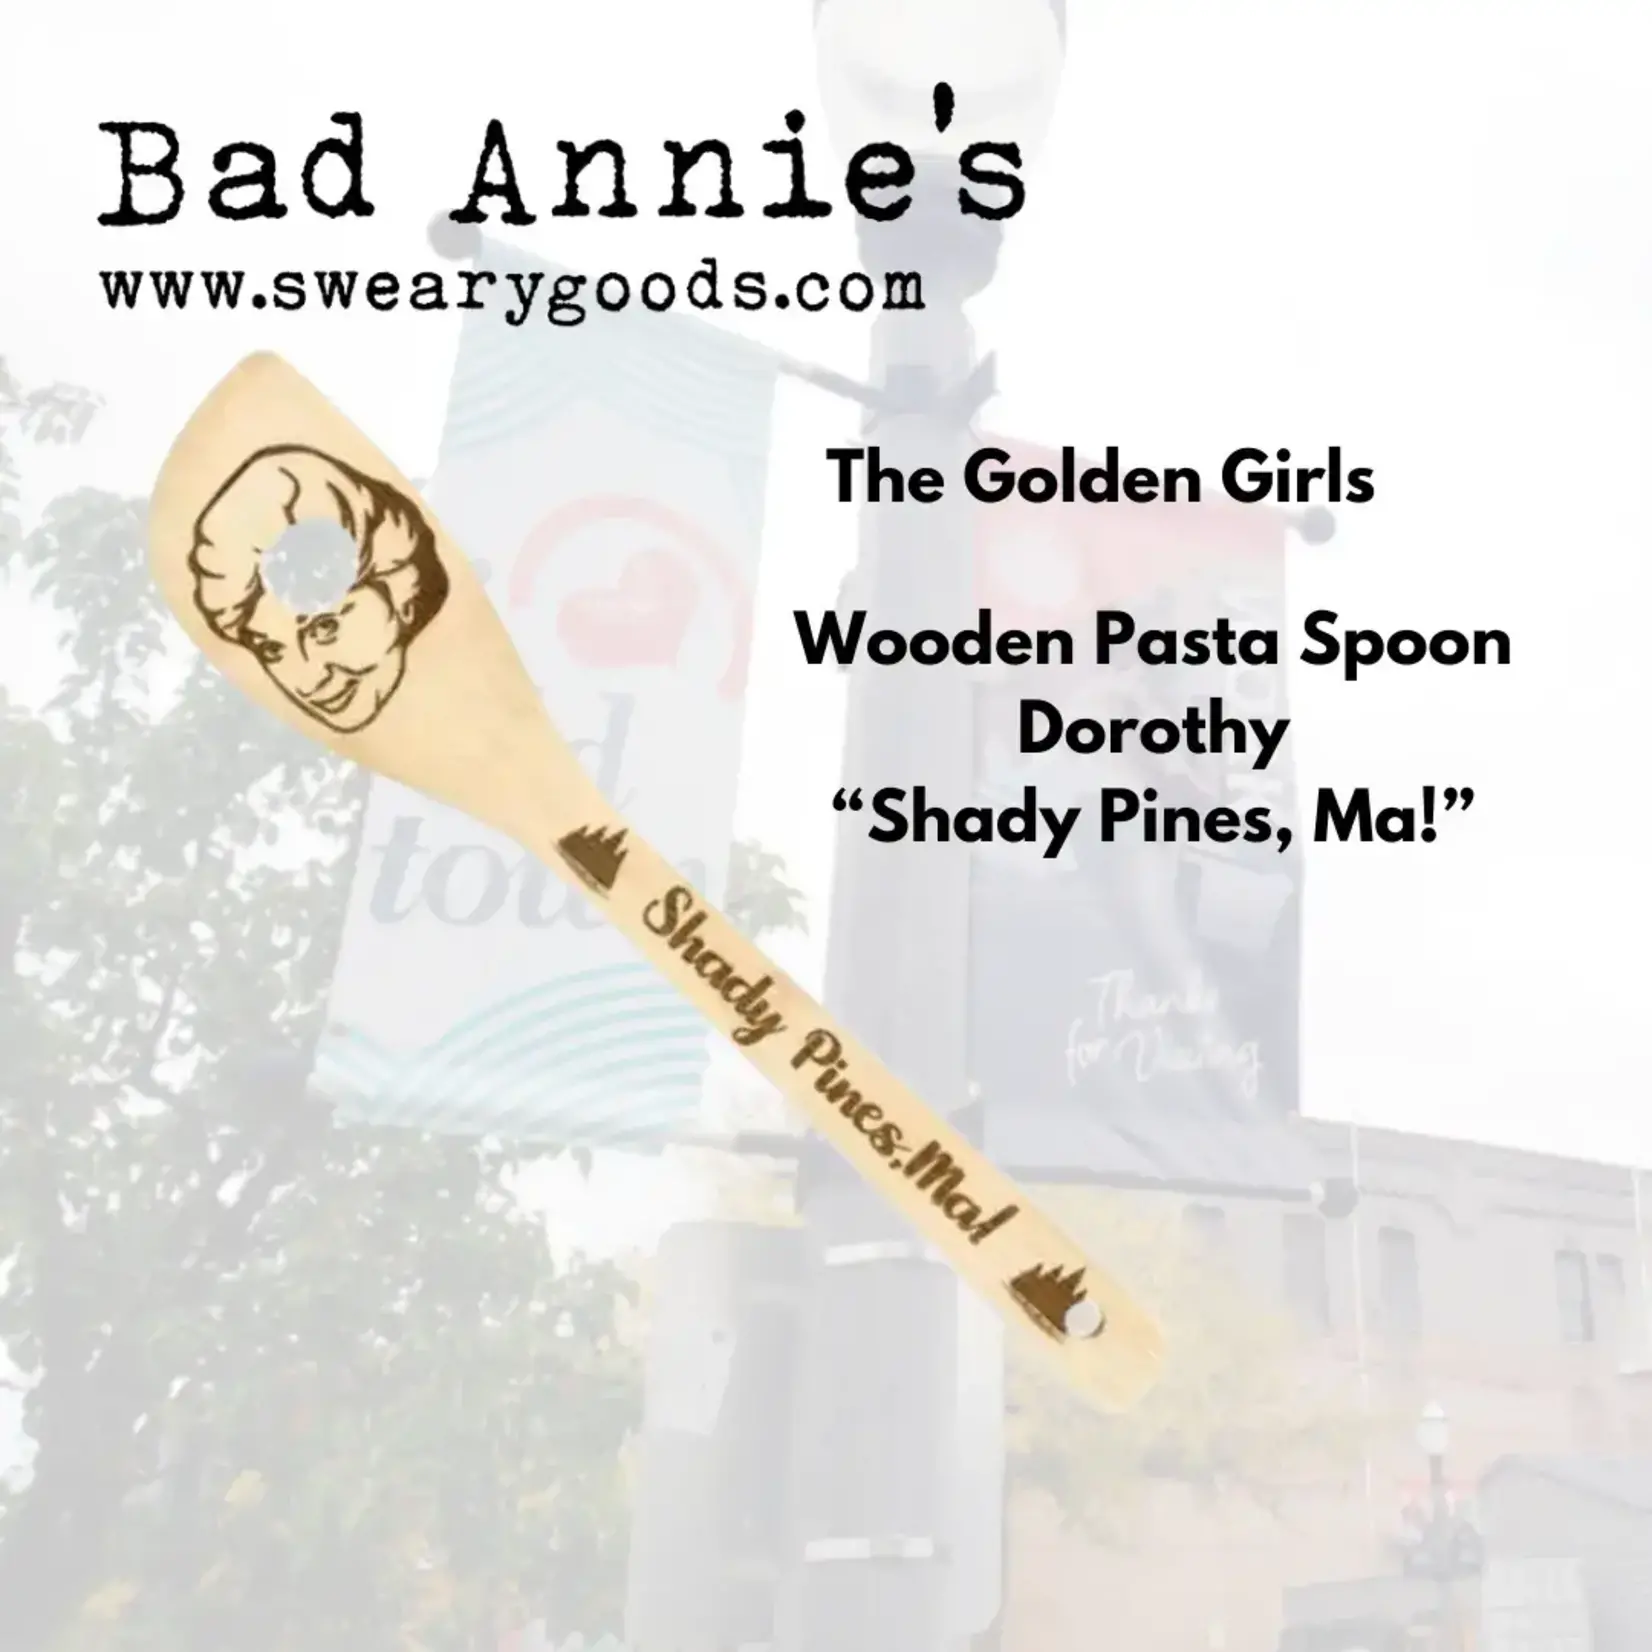 Wooden Dorothy Pasta Spoon - Shady Pines, Ma - The Golden Girls